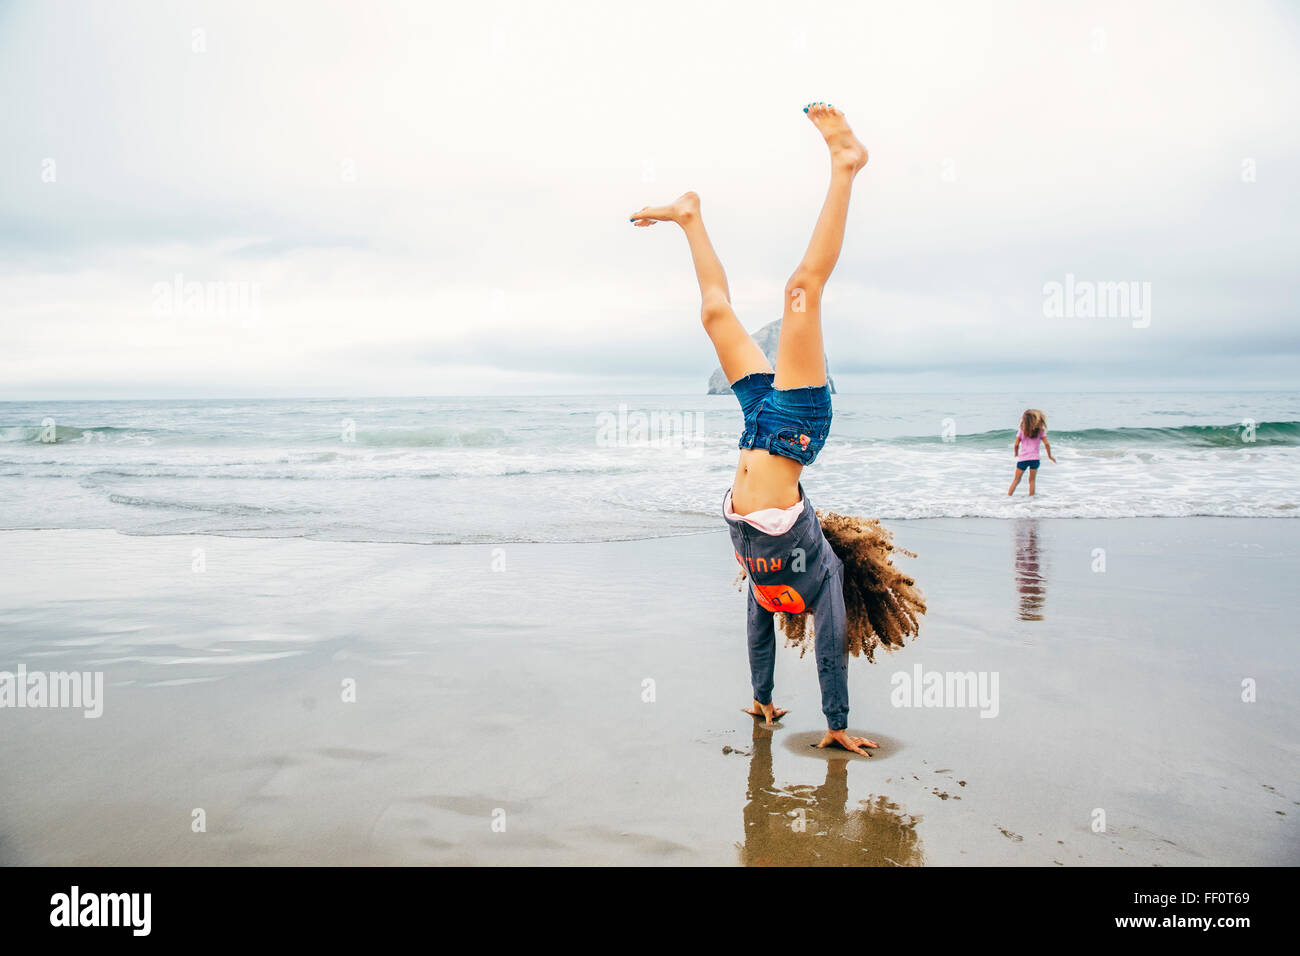 Mixed Race girl doing handstand on beach Banque D'Images